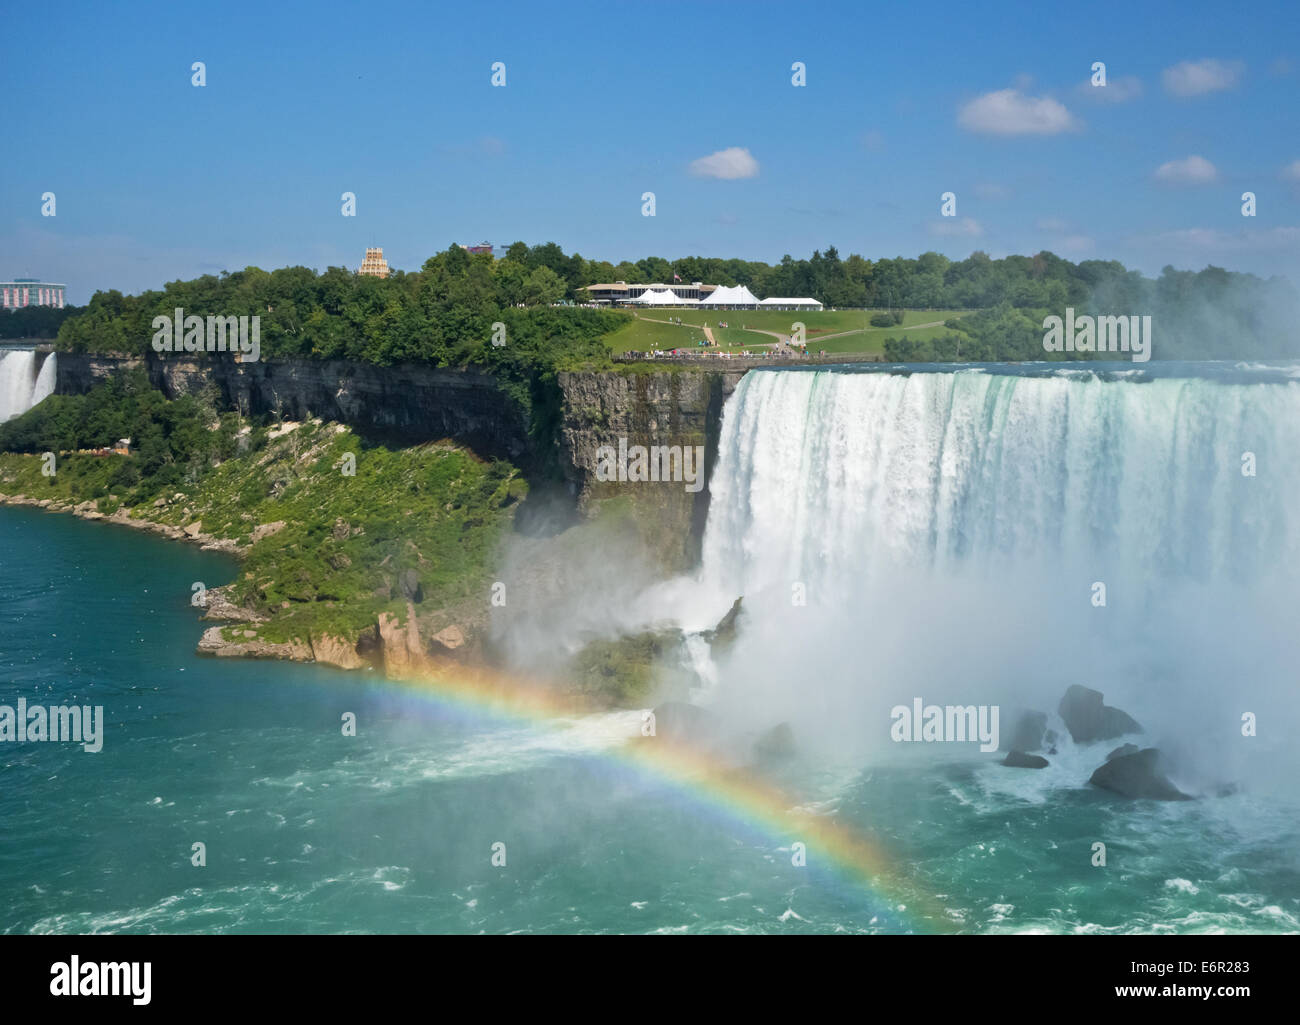 Horseshoe Falls in Niagara Falls with rainbow in the mist.  View from Canadian side of the visitor park on the American side. Stock Photo